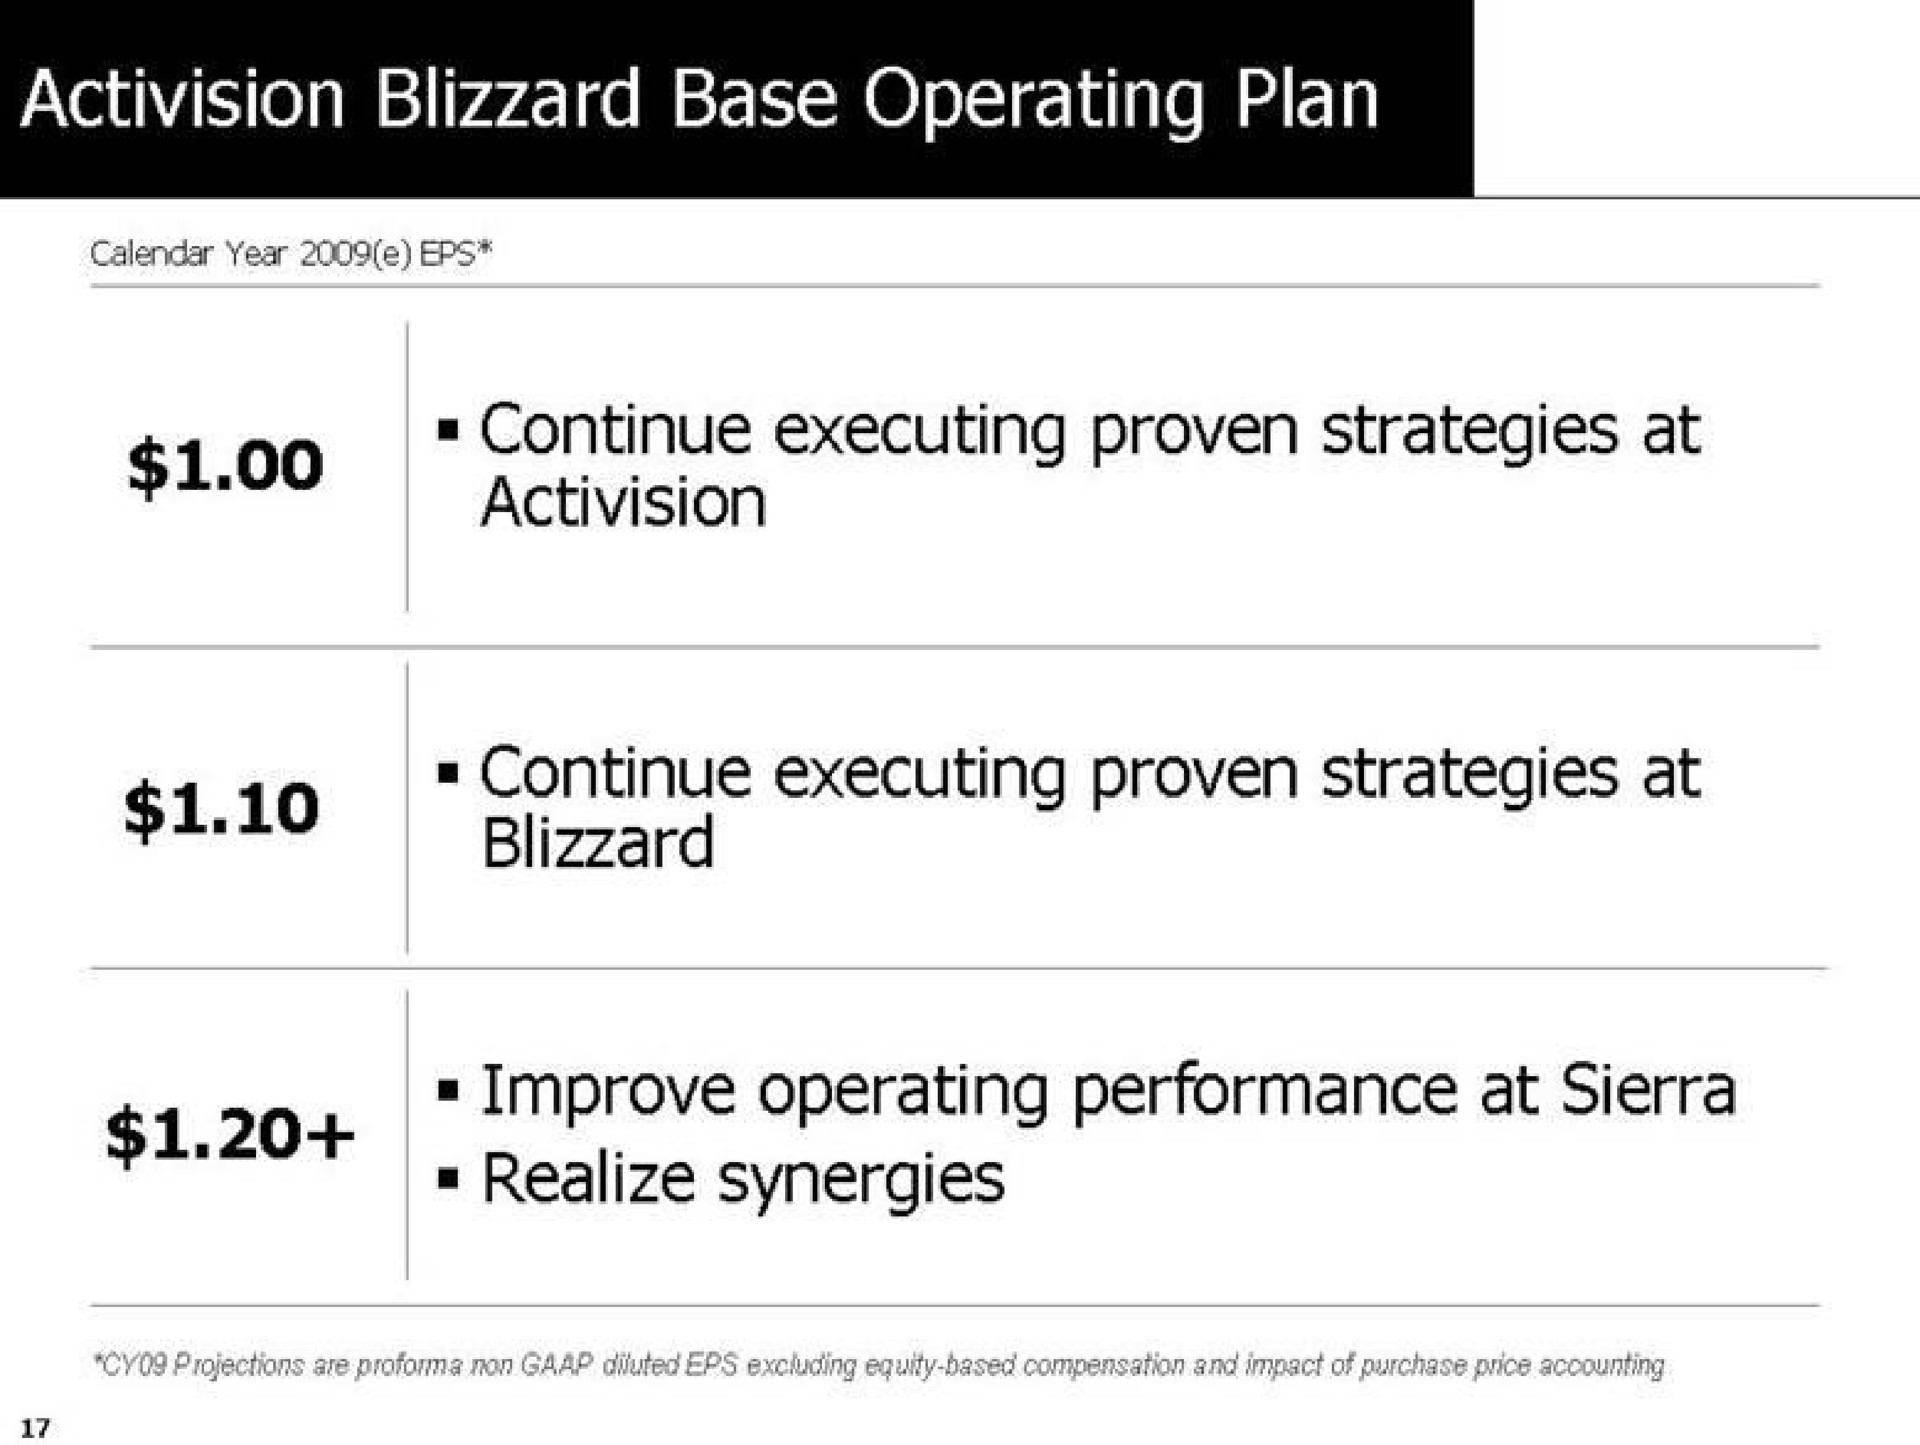 blizzard base operating plan improve operating performance at sierra realize synergies | Activision Blizzard